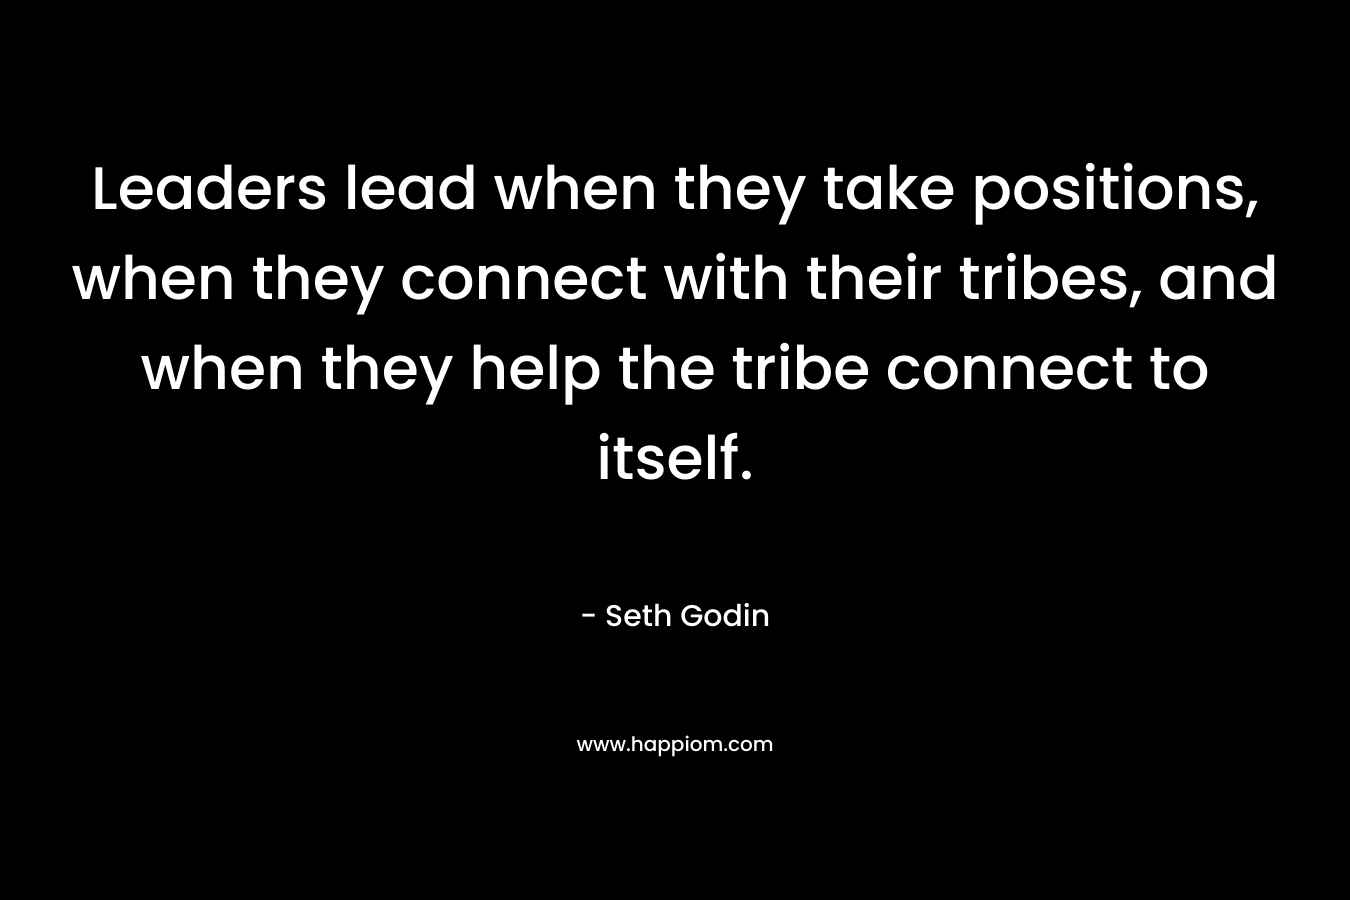 Leaders lead when they take positions, when they connect with their tribes, and when they help the tribe connect to itself. – Seth Godin